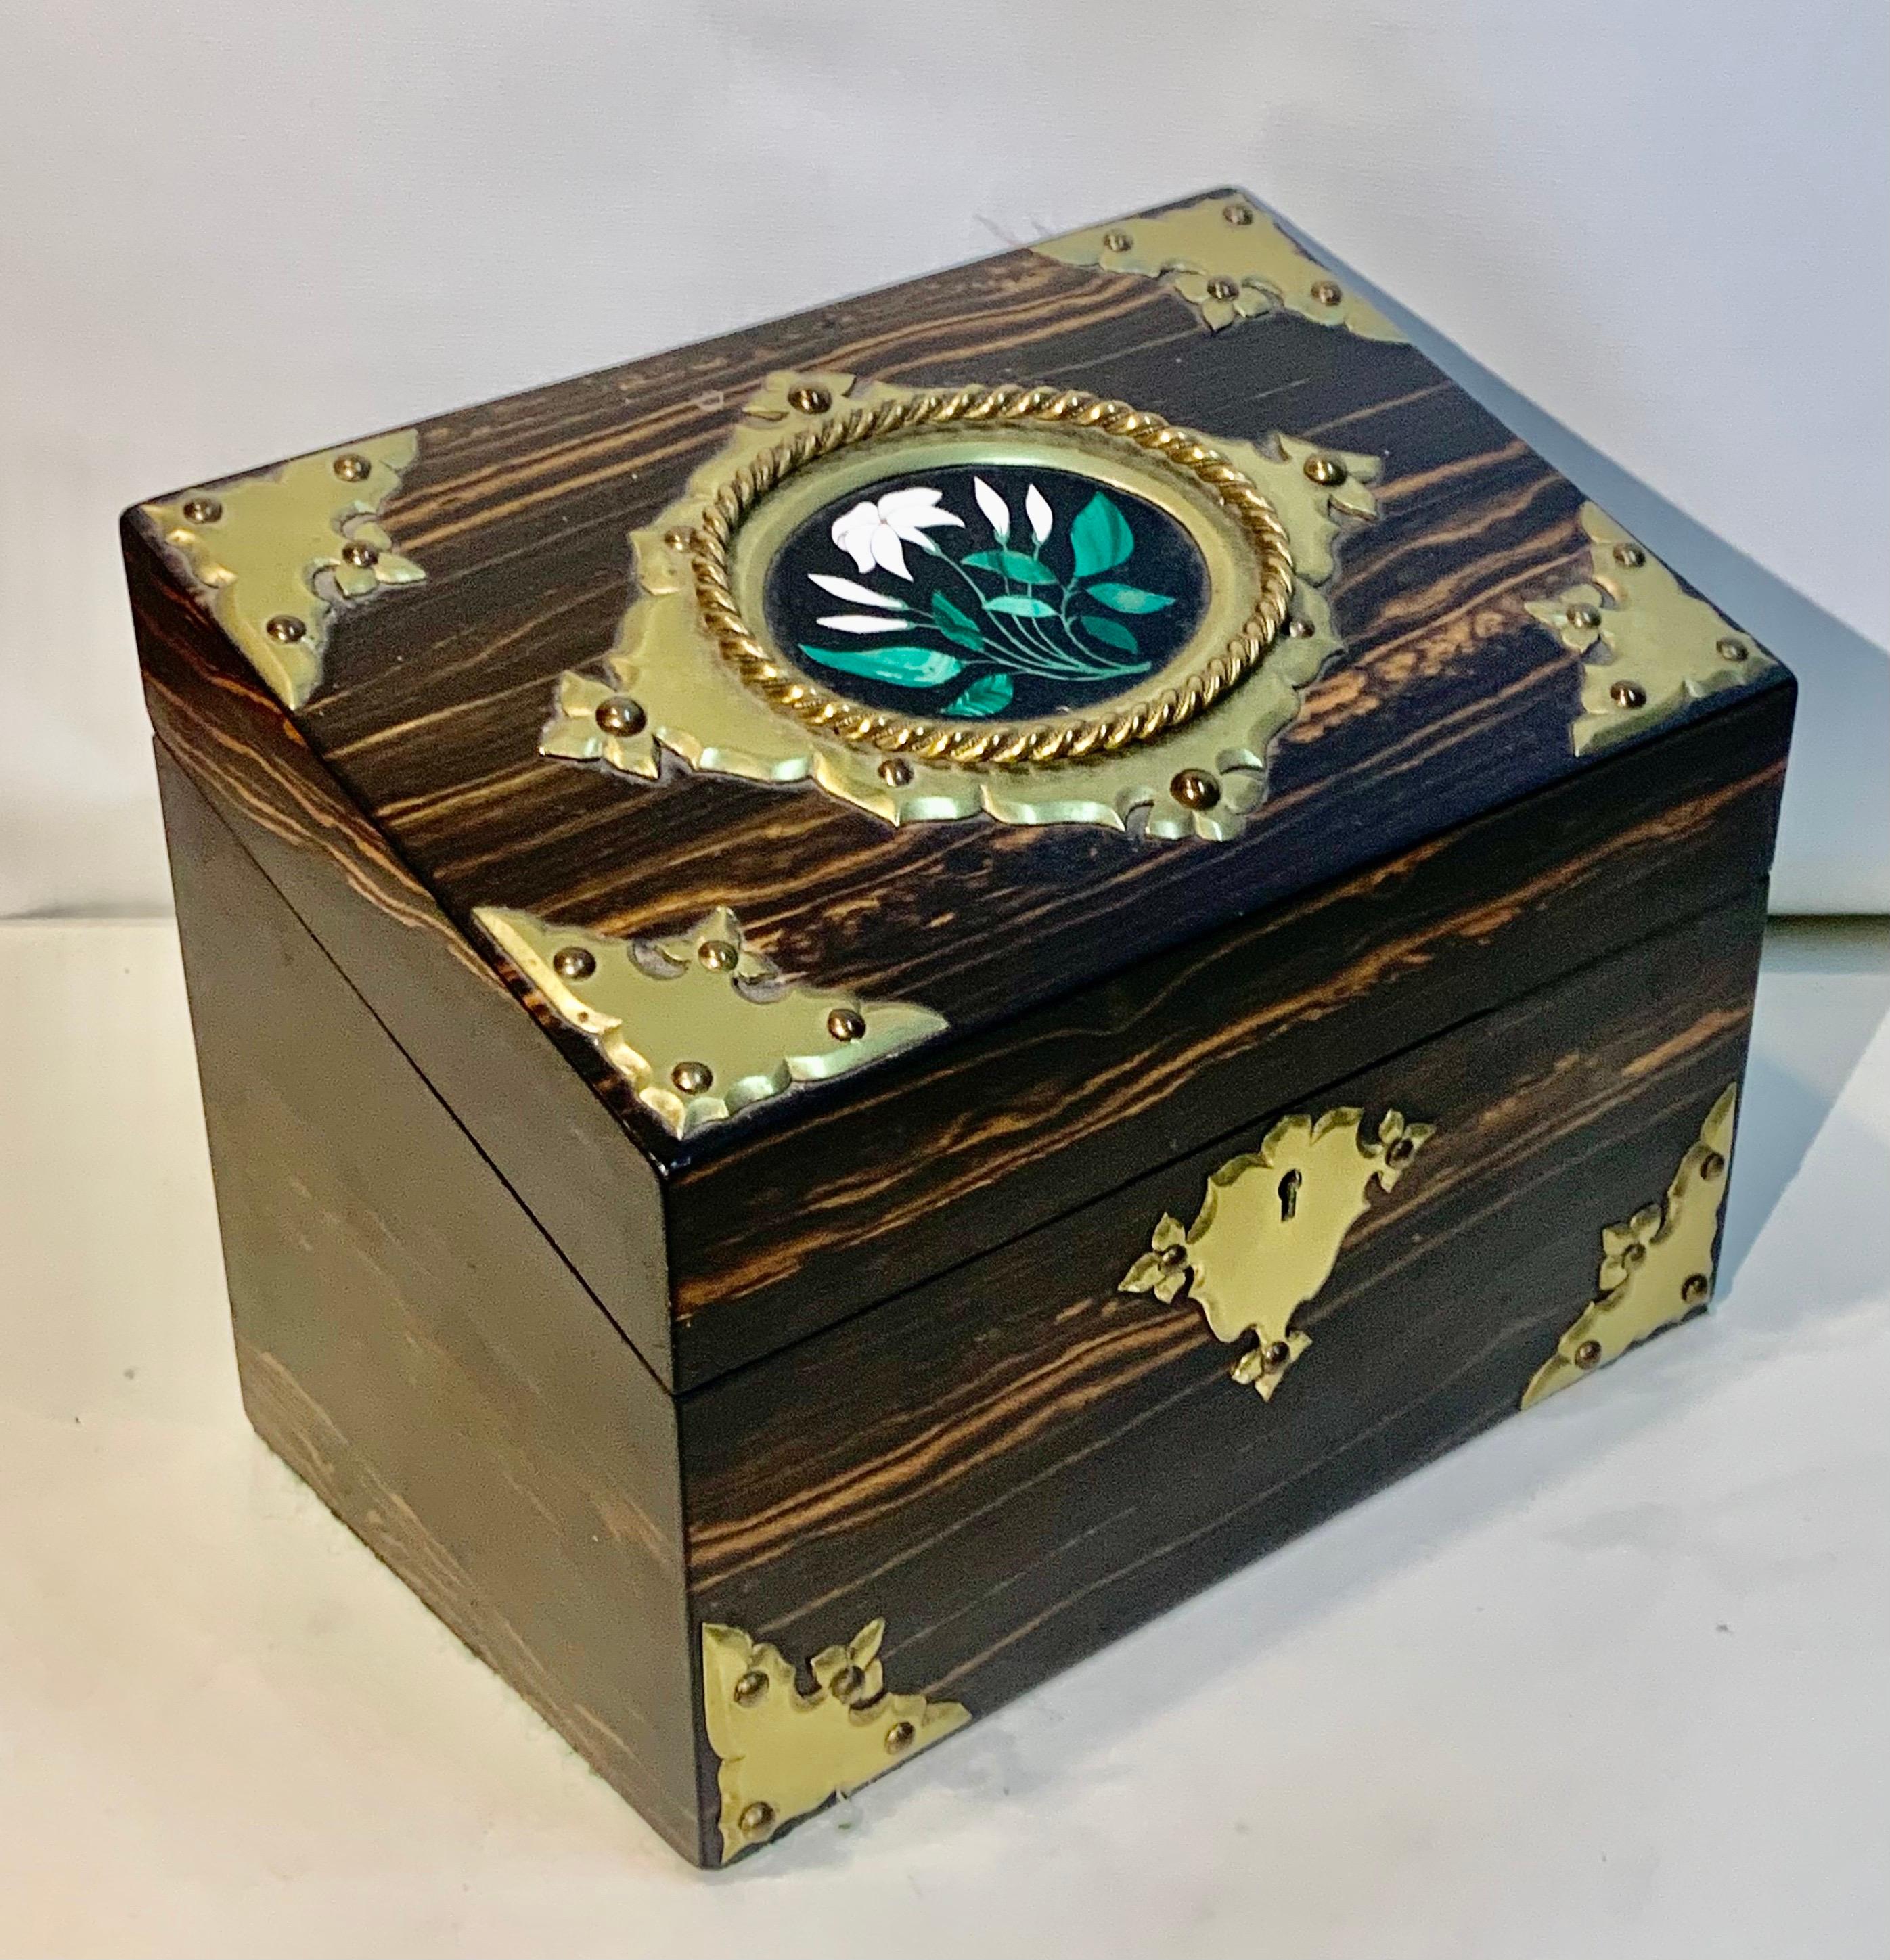 A fine Victorian Coromandel stationary box, the sloping hinged cover inset with a pietra dura panel depicting flowers, within a gilt metal mount lifting to reveal a fabric lined compartmented interior. The condition is very good and its ready to use.